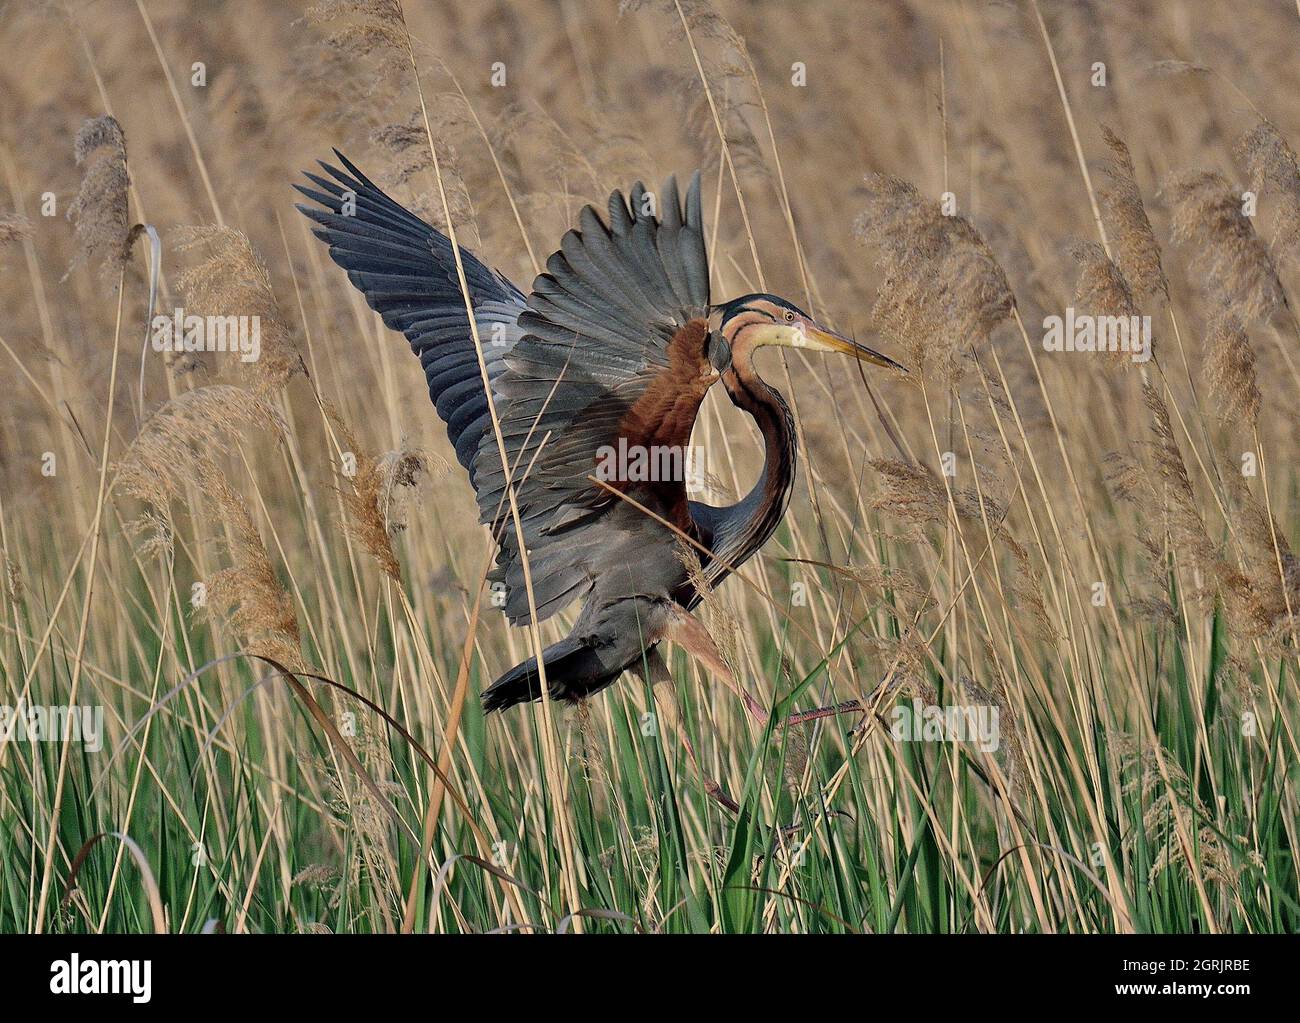 Close-up Of Bird Flying In Grass Stock Photo